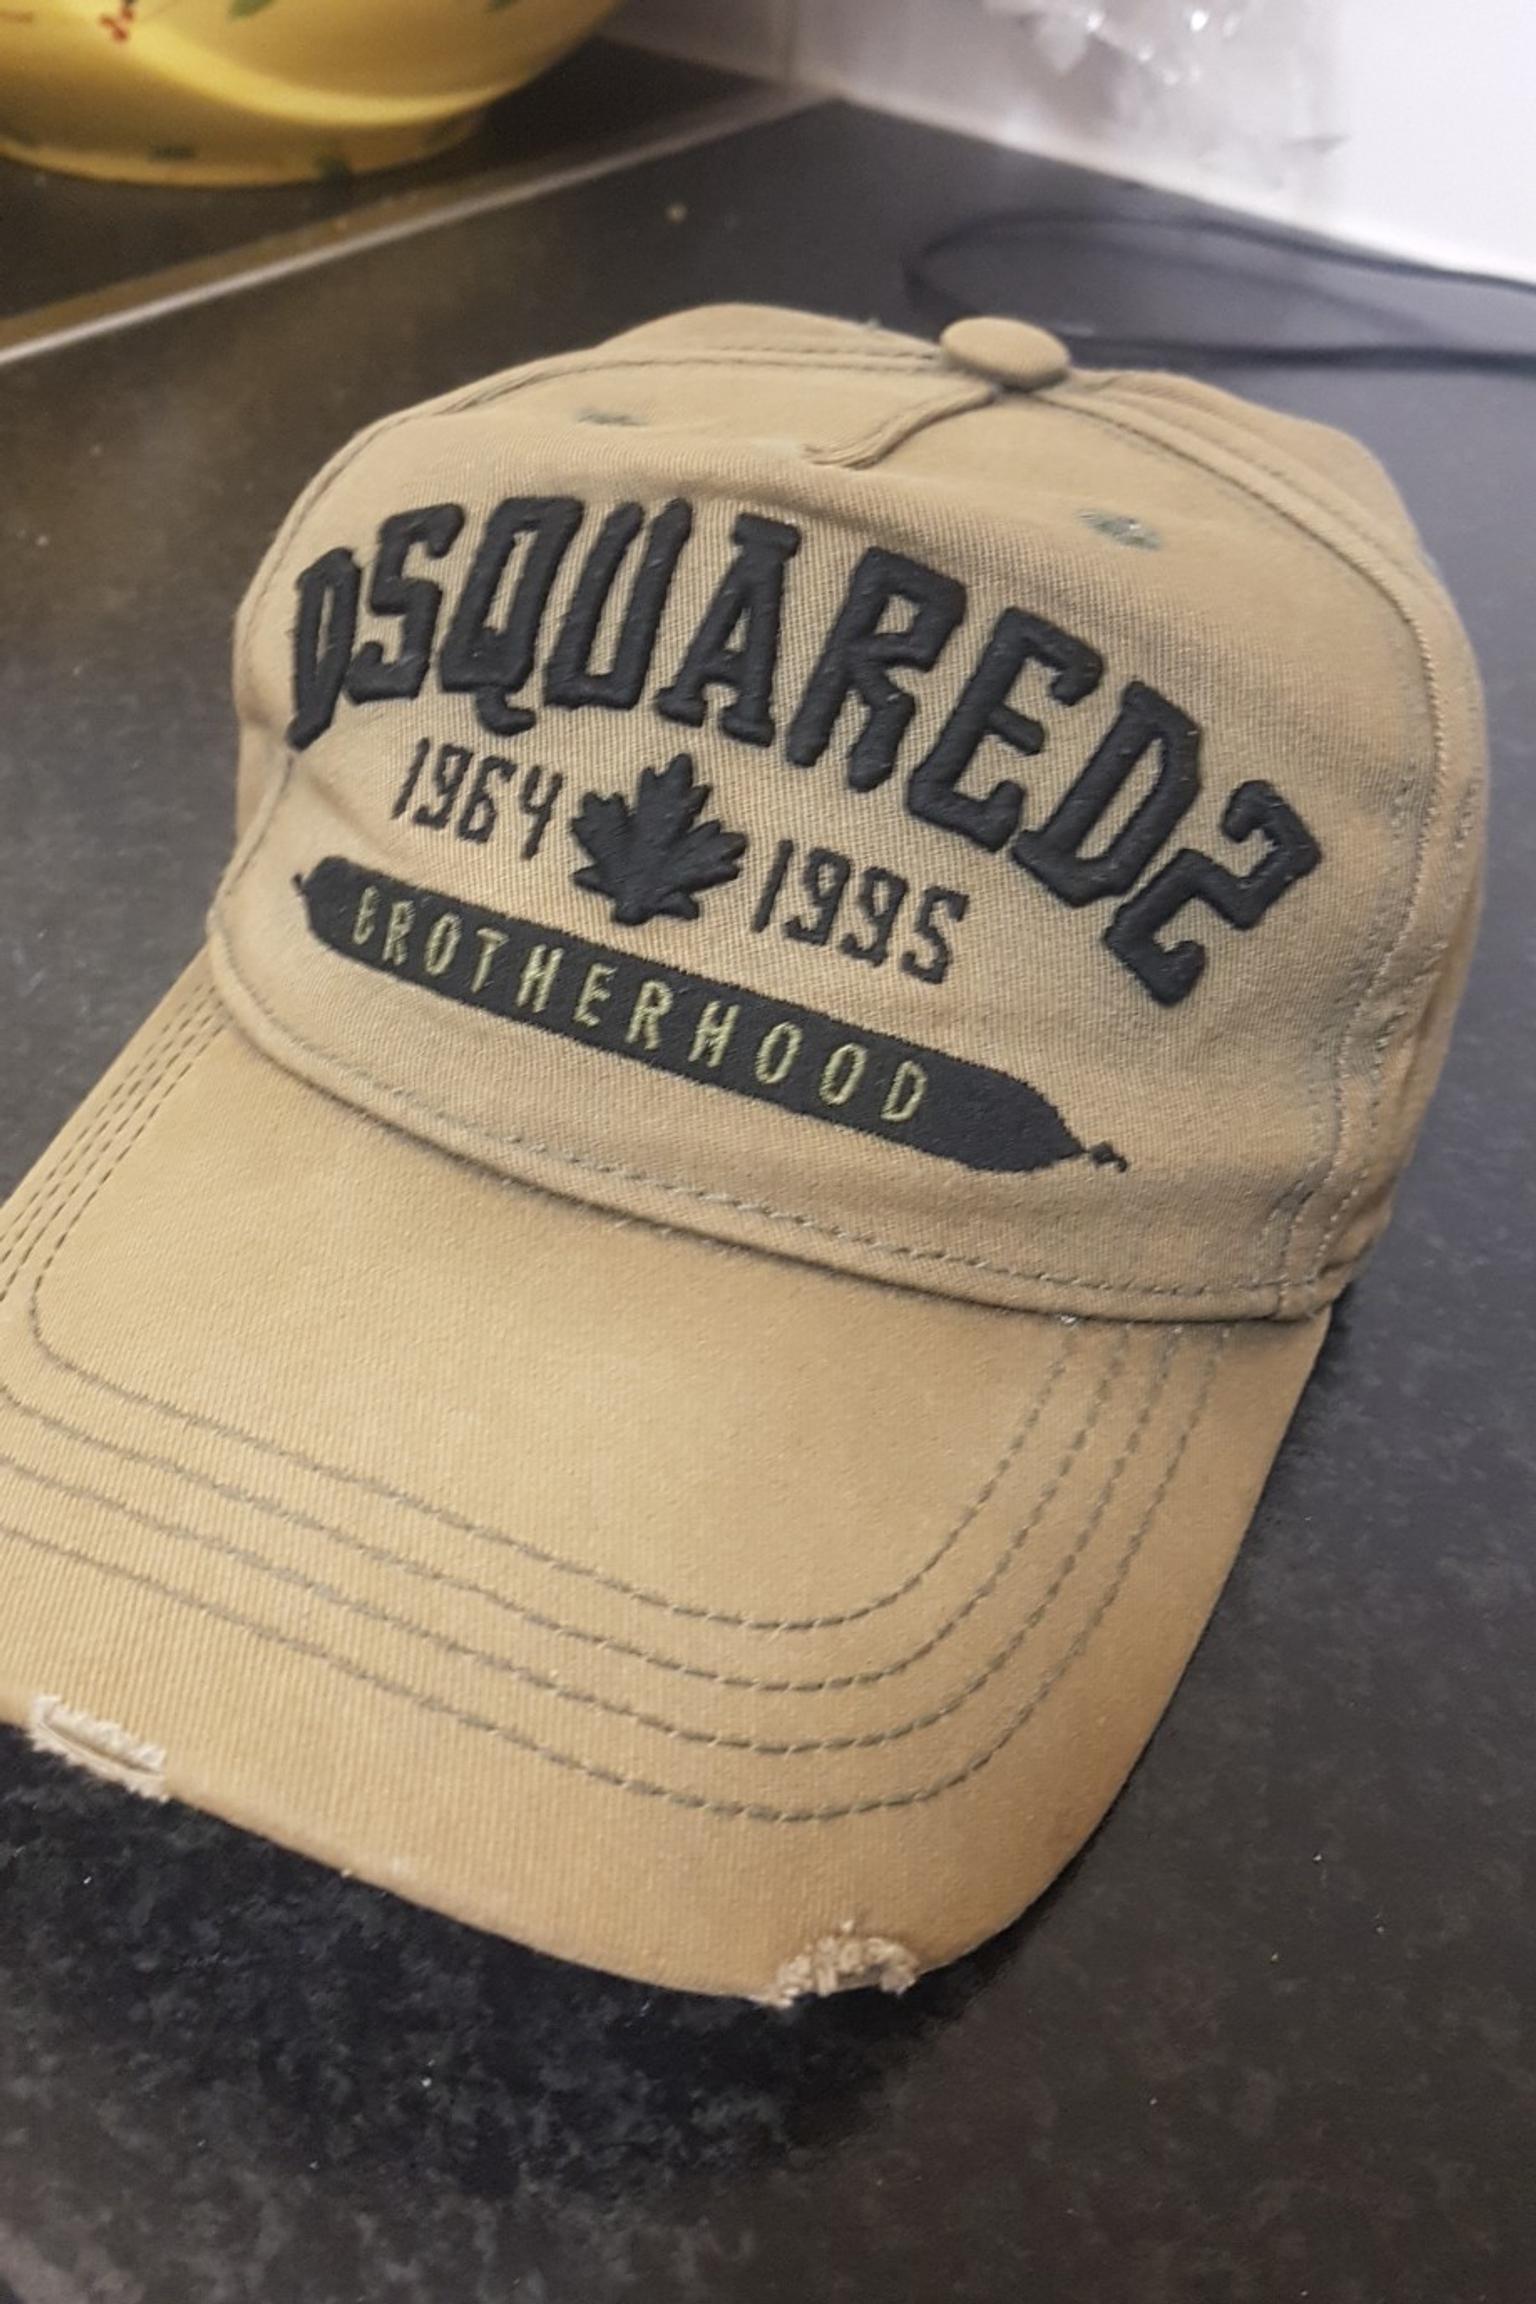 DSQUARED2 HAT in N18 Enfield for £60.00 